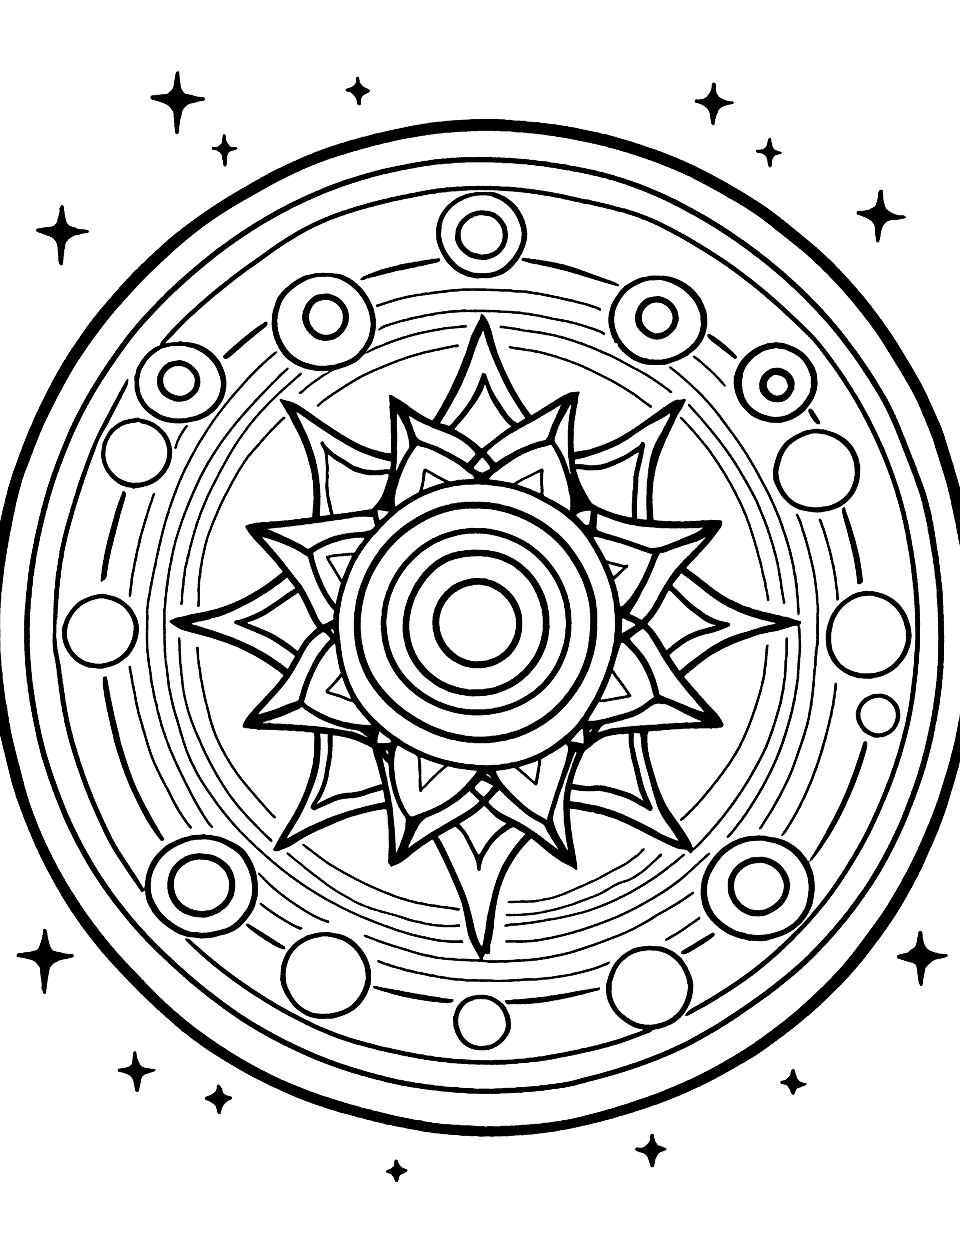 Celestial Comet Mandala Coloring Page - An advanced mandala showing a celestial theme with shooting stars and planets.